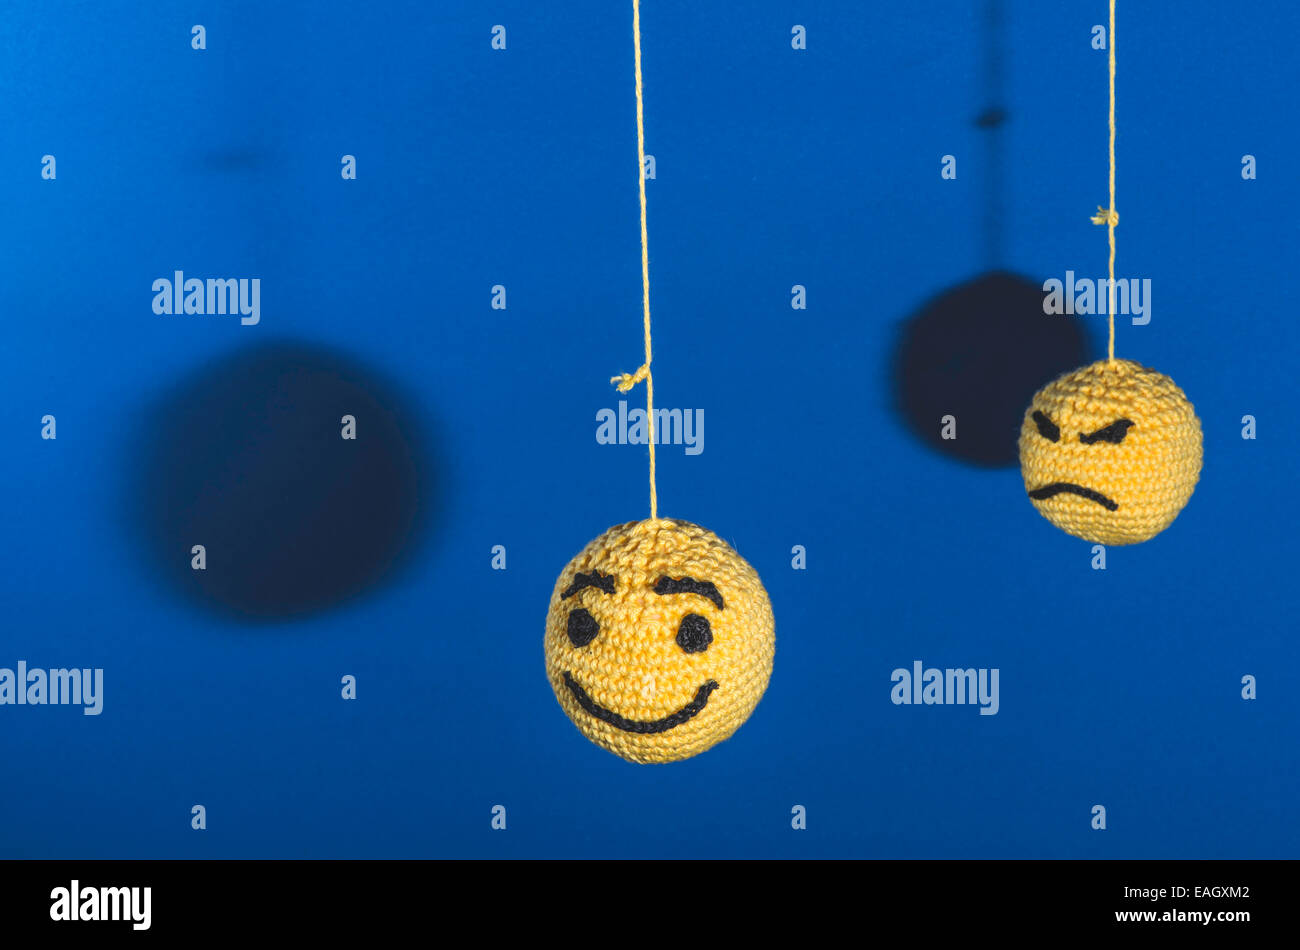 Knitted yellow emoticons on blue background Stock Photo